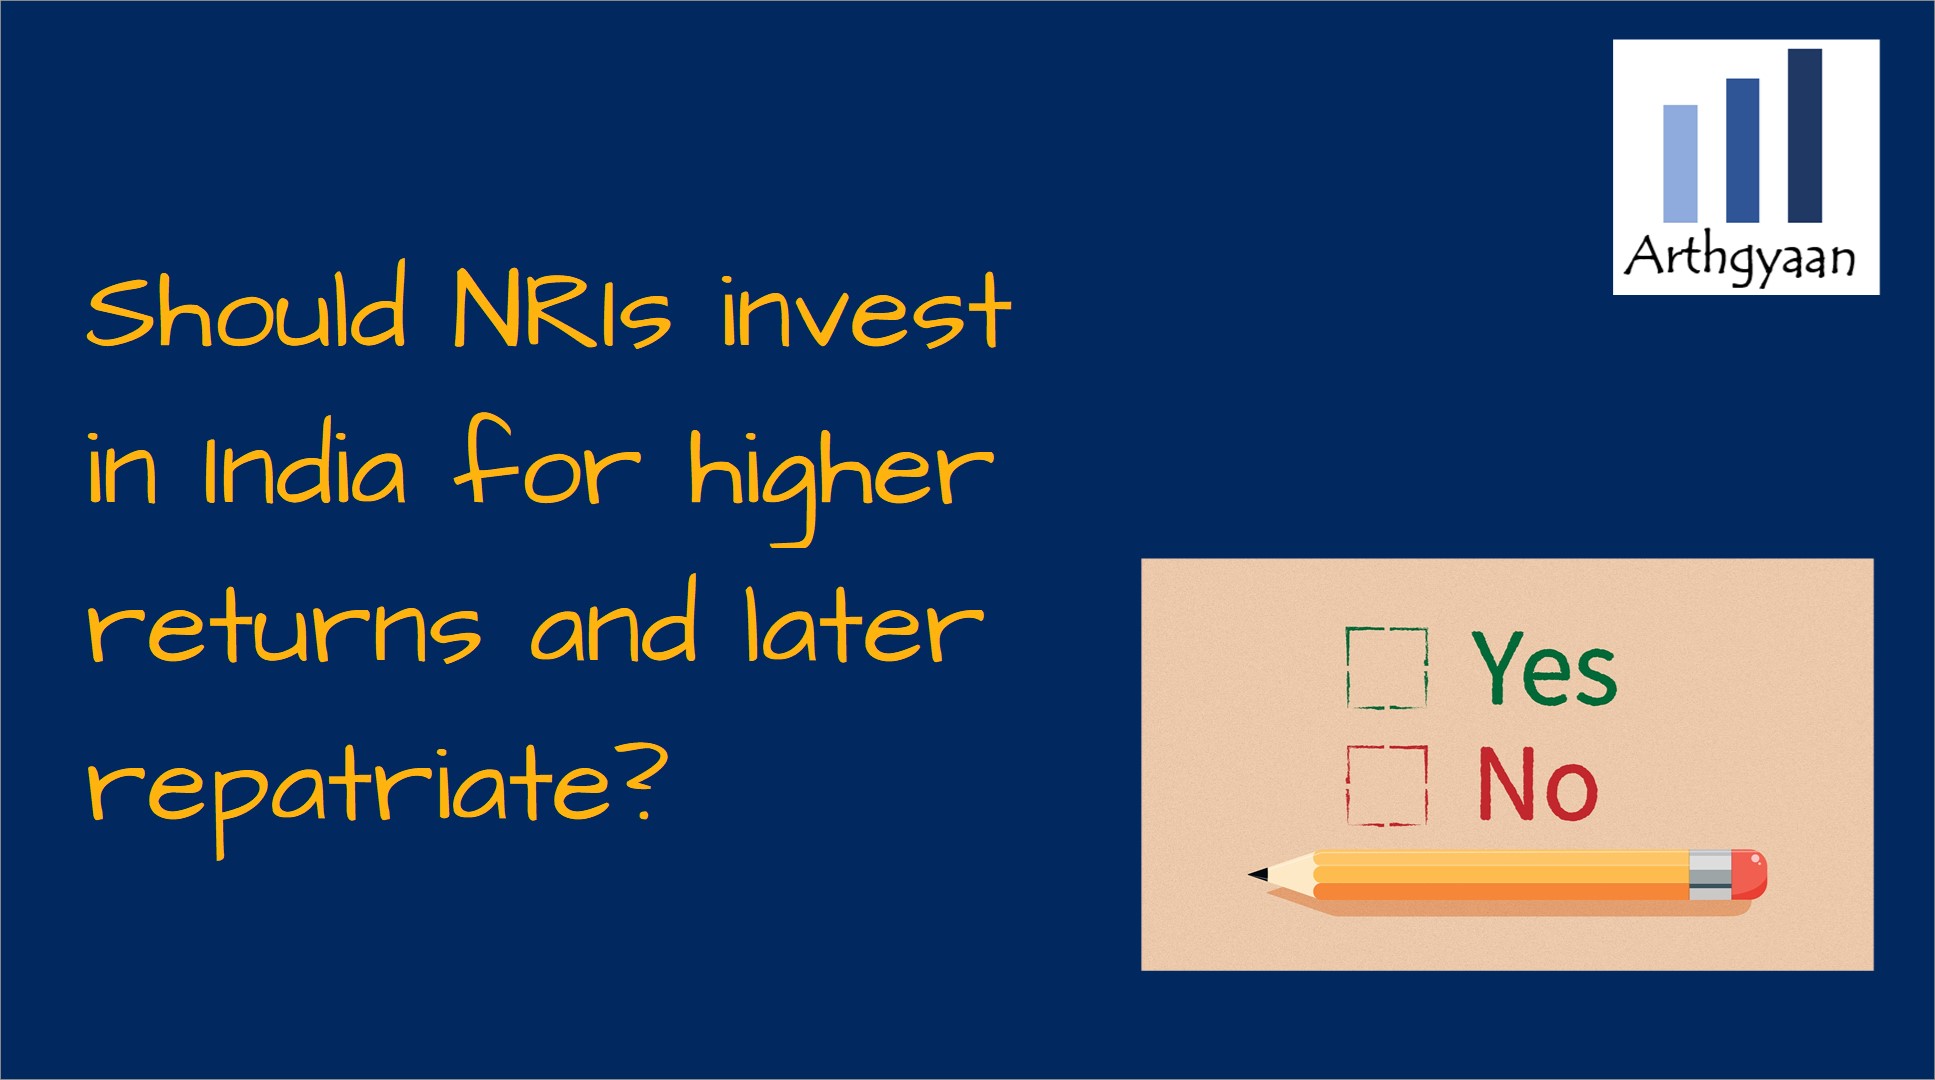 Should NRIs invest in India for higher returns and later repatriate?